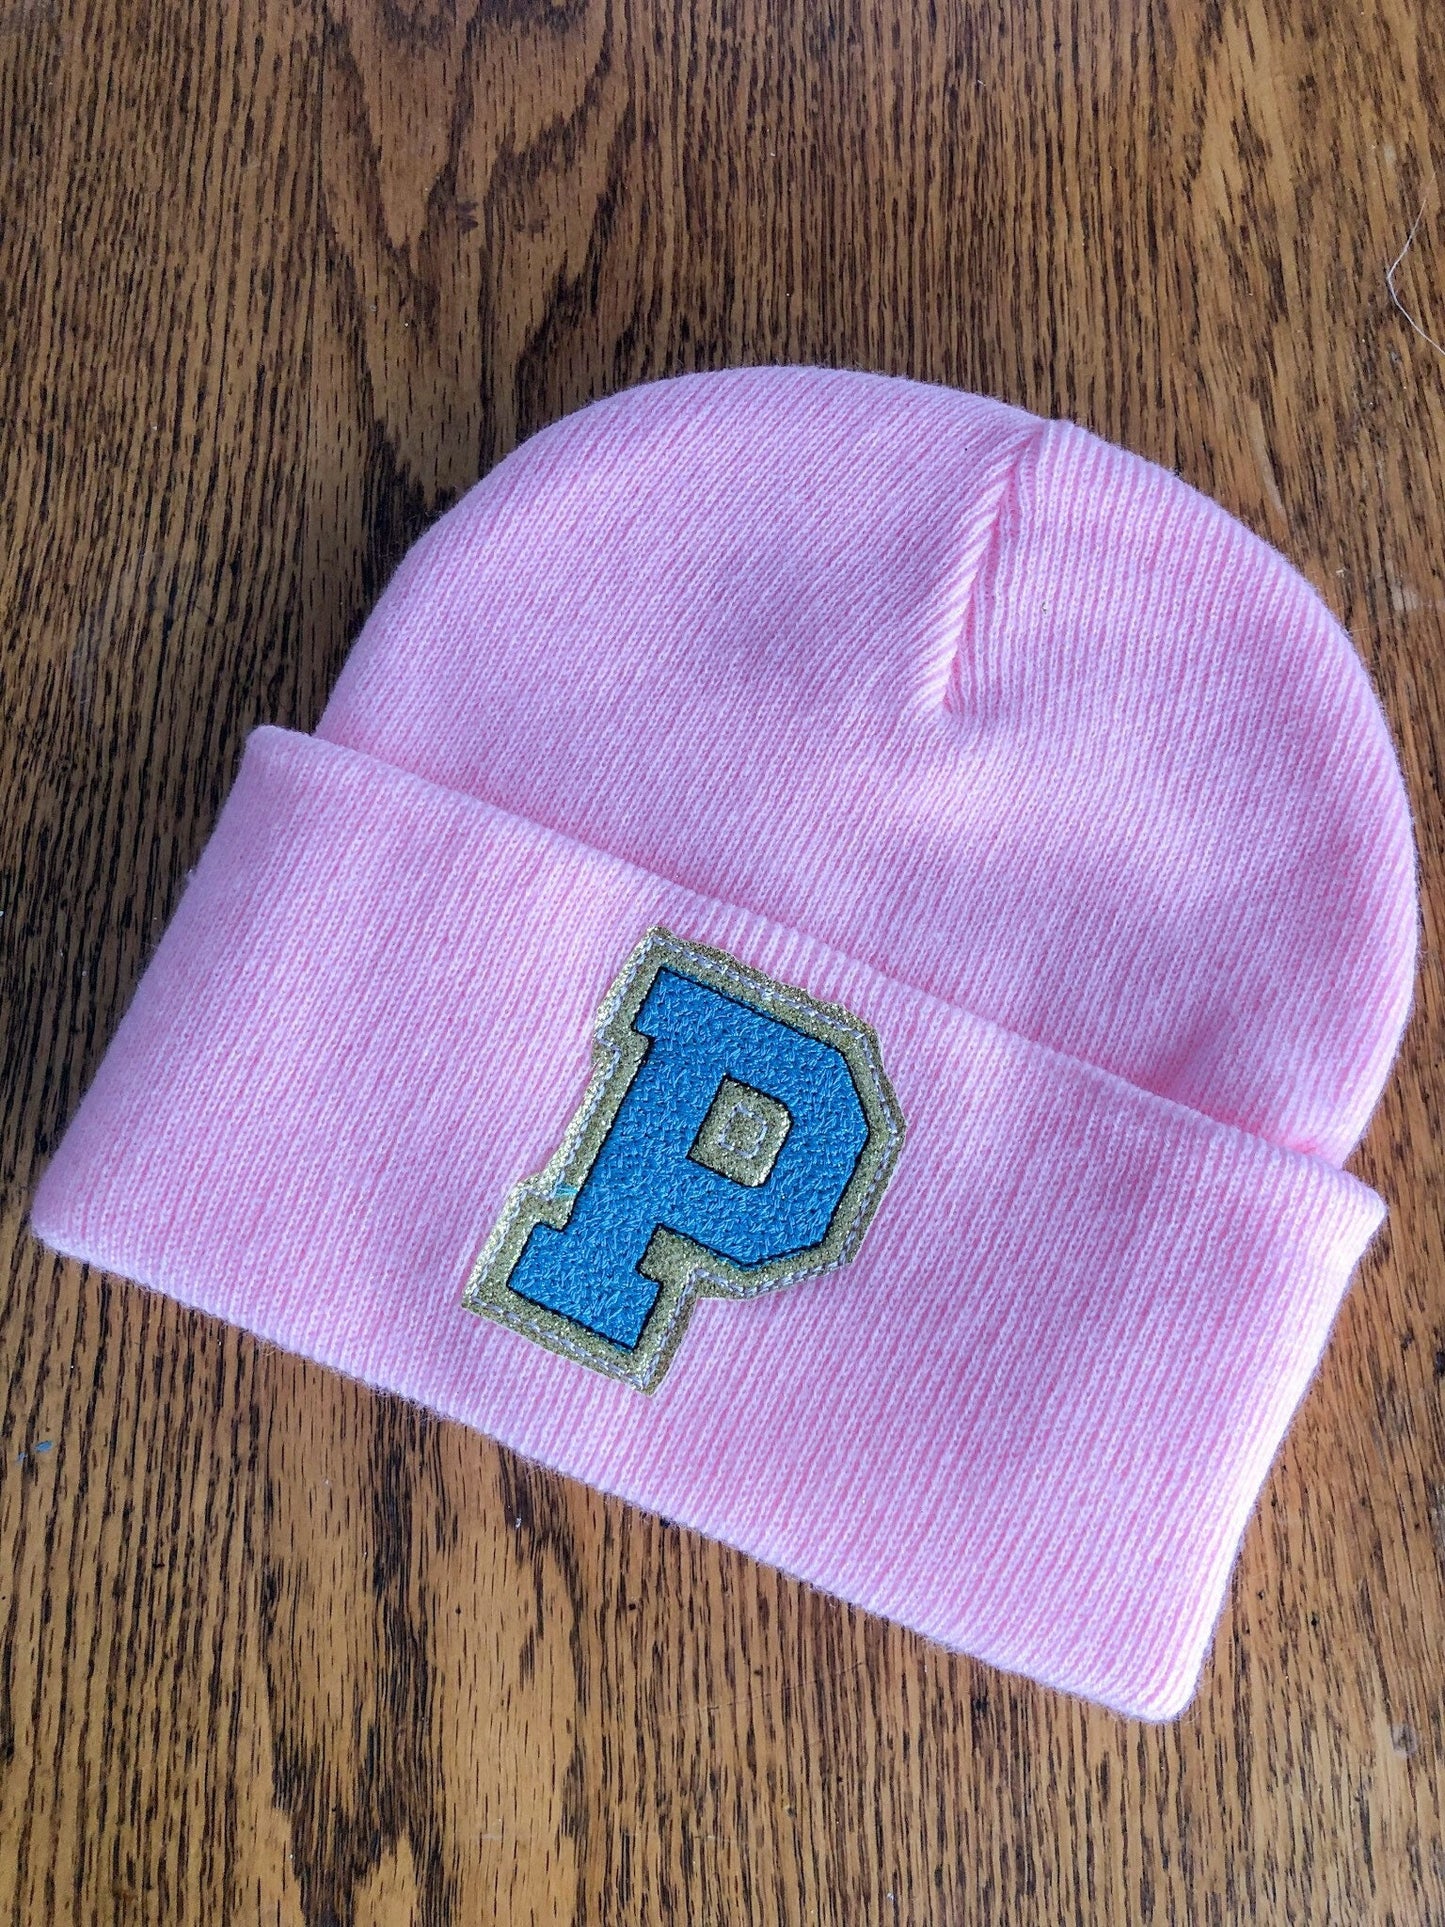 Embroidered Letter Patch Beanie Personalized Beanie Chenille style Patch Beanie Glitter Patch Monogrammed Beanie Retro Monogrammed Beanie